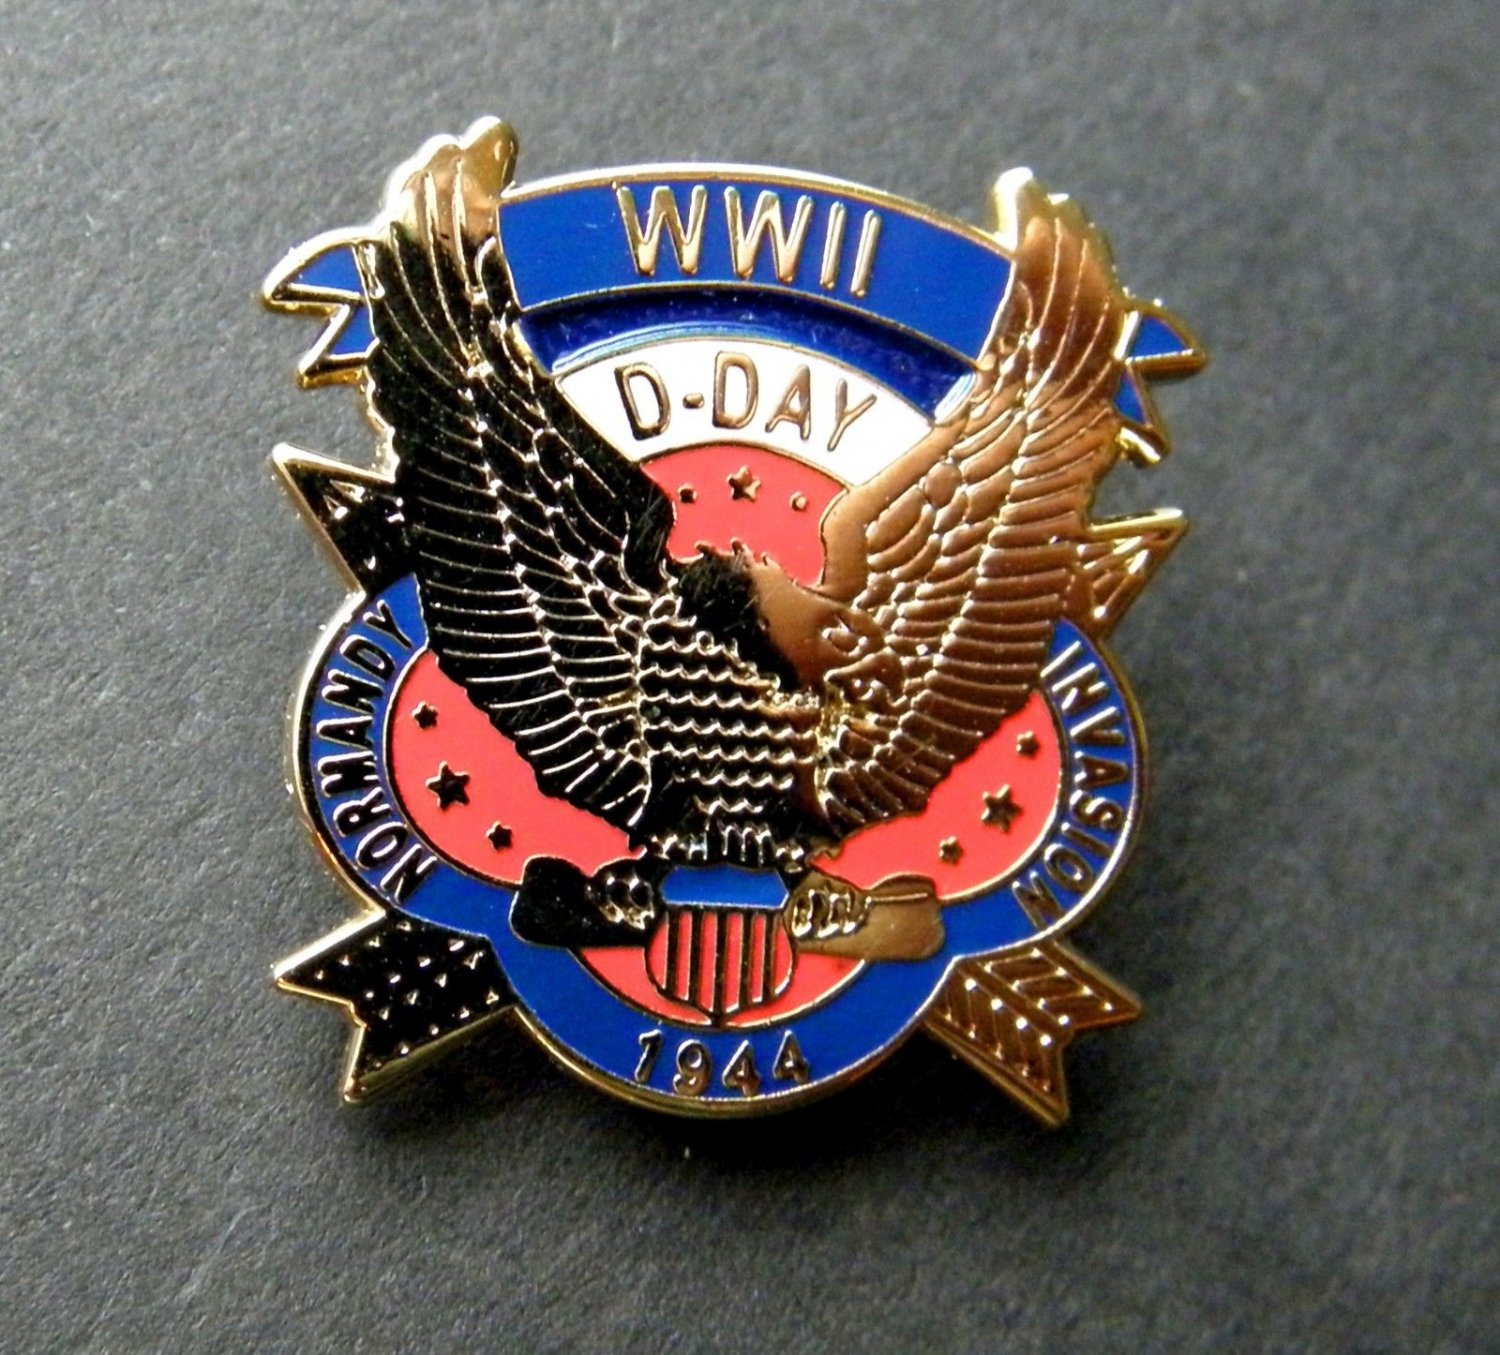 Wwii World War 2 D Day Normandy Invasion 1944 Lapel Pin 1 Inch